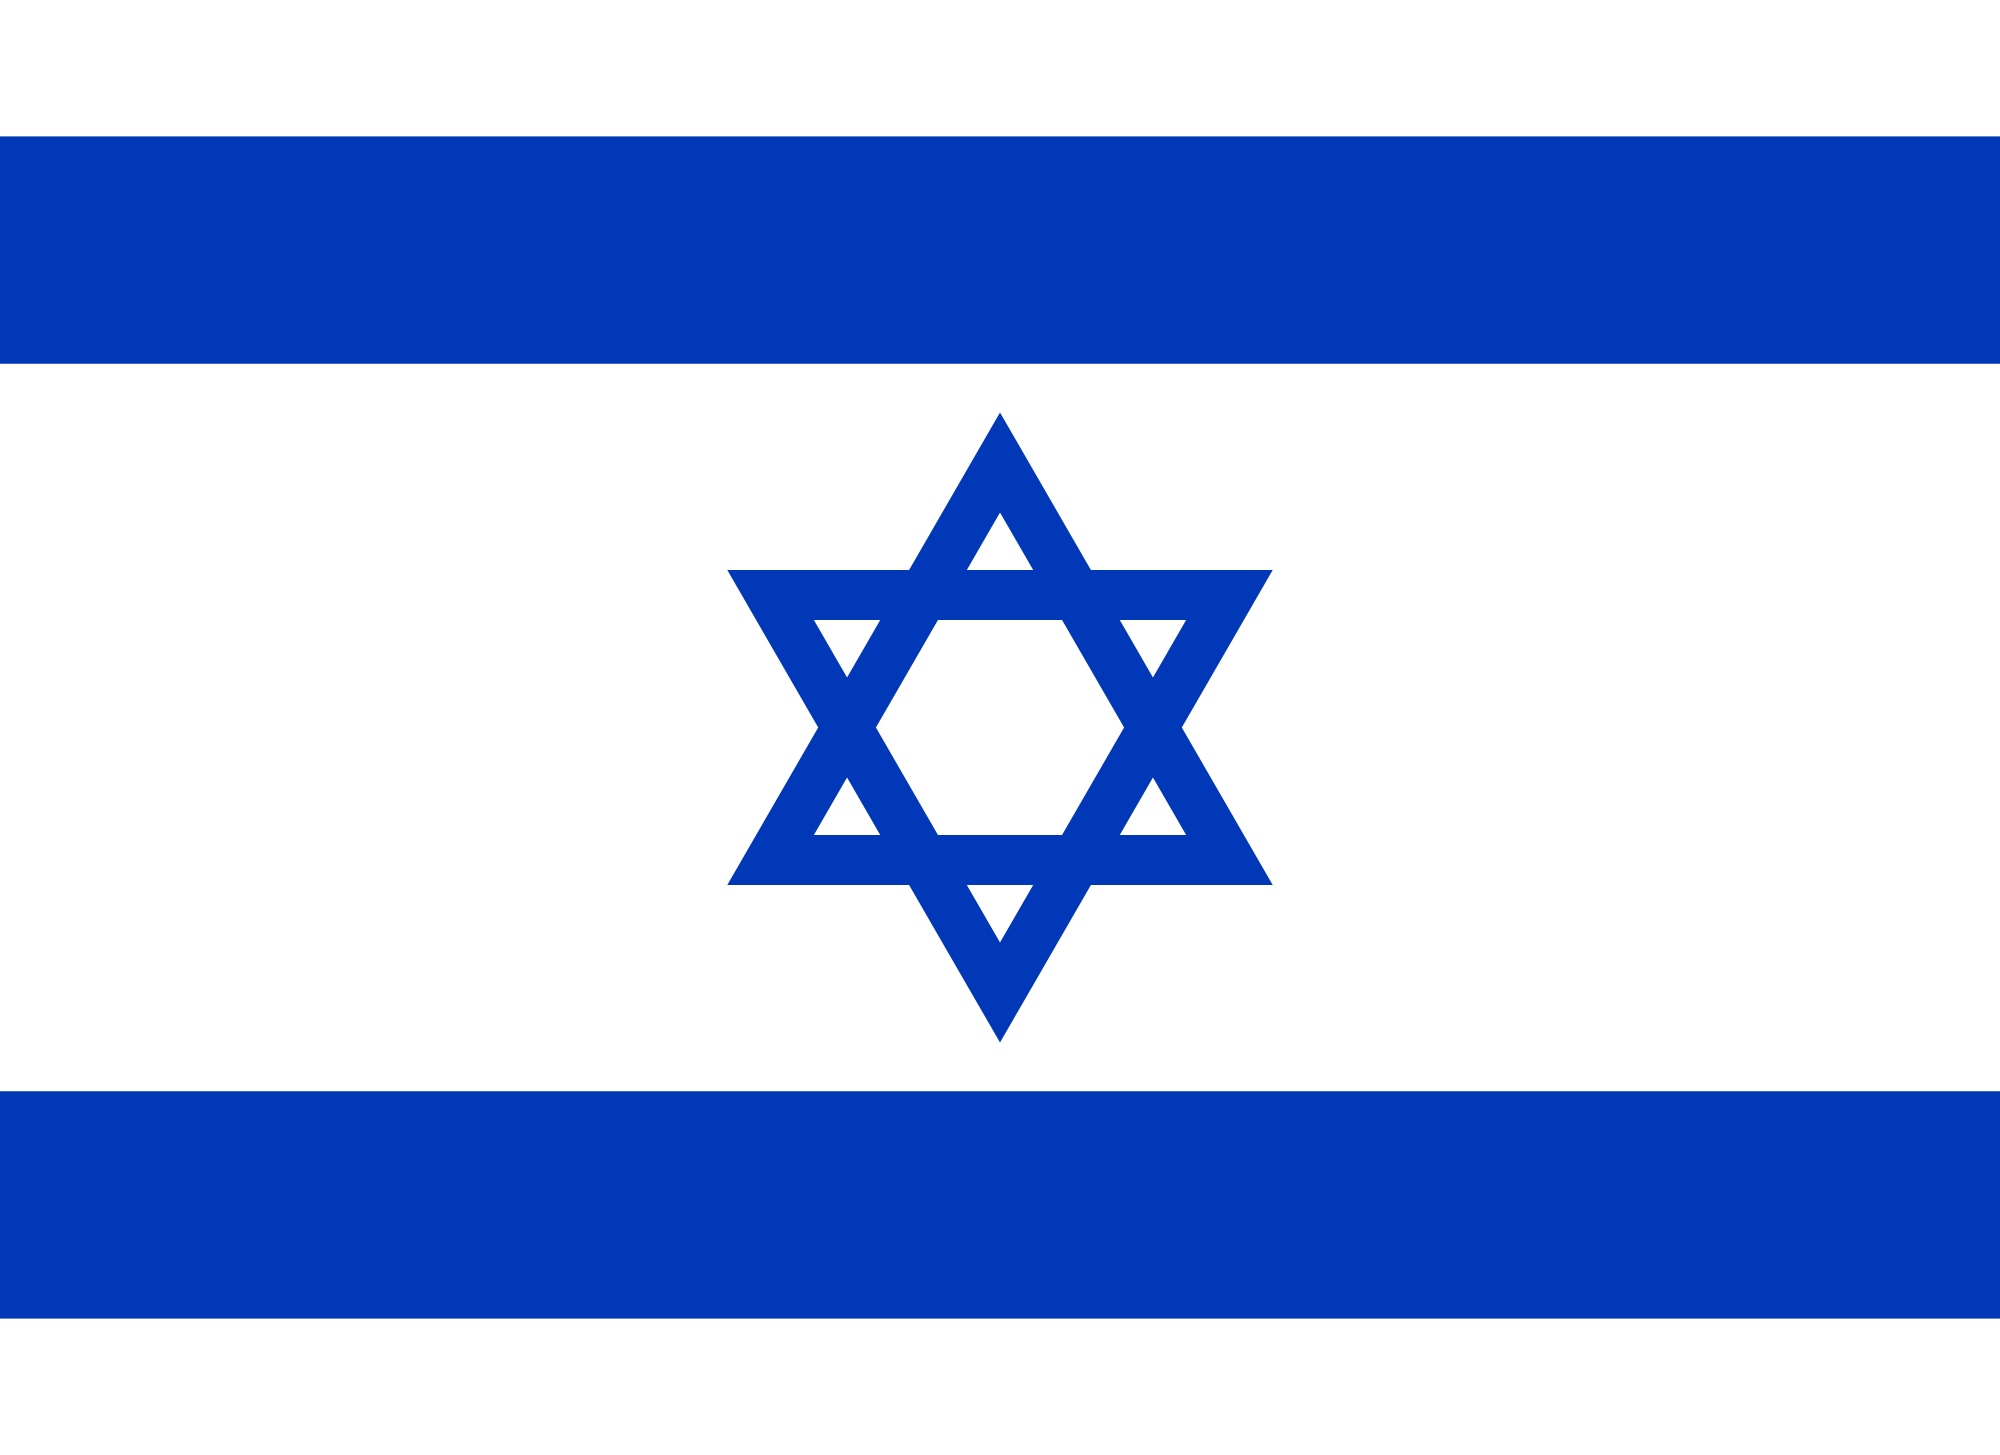 https://upload.wikimedia.org/wikipedia/commons/thumb/d/d4/Flag_of_Israel.svg/2000px-Flag_of_Israel.svg.png